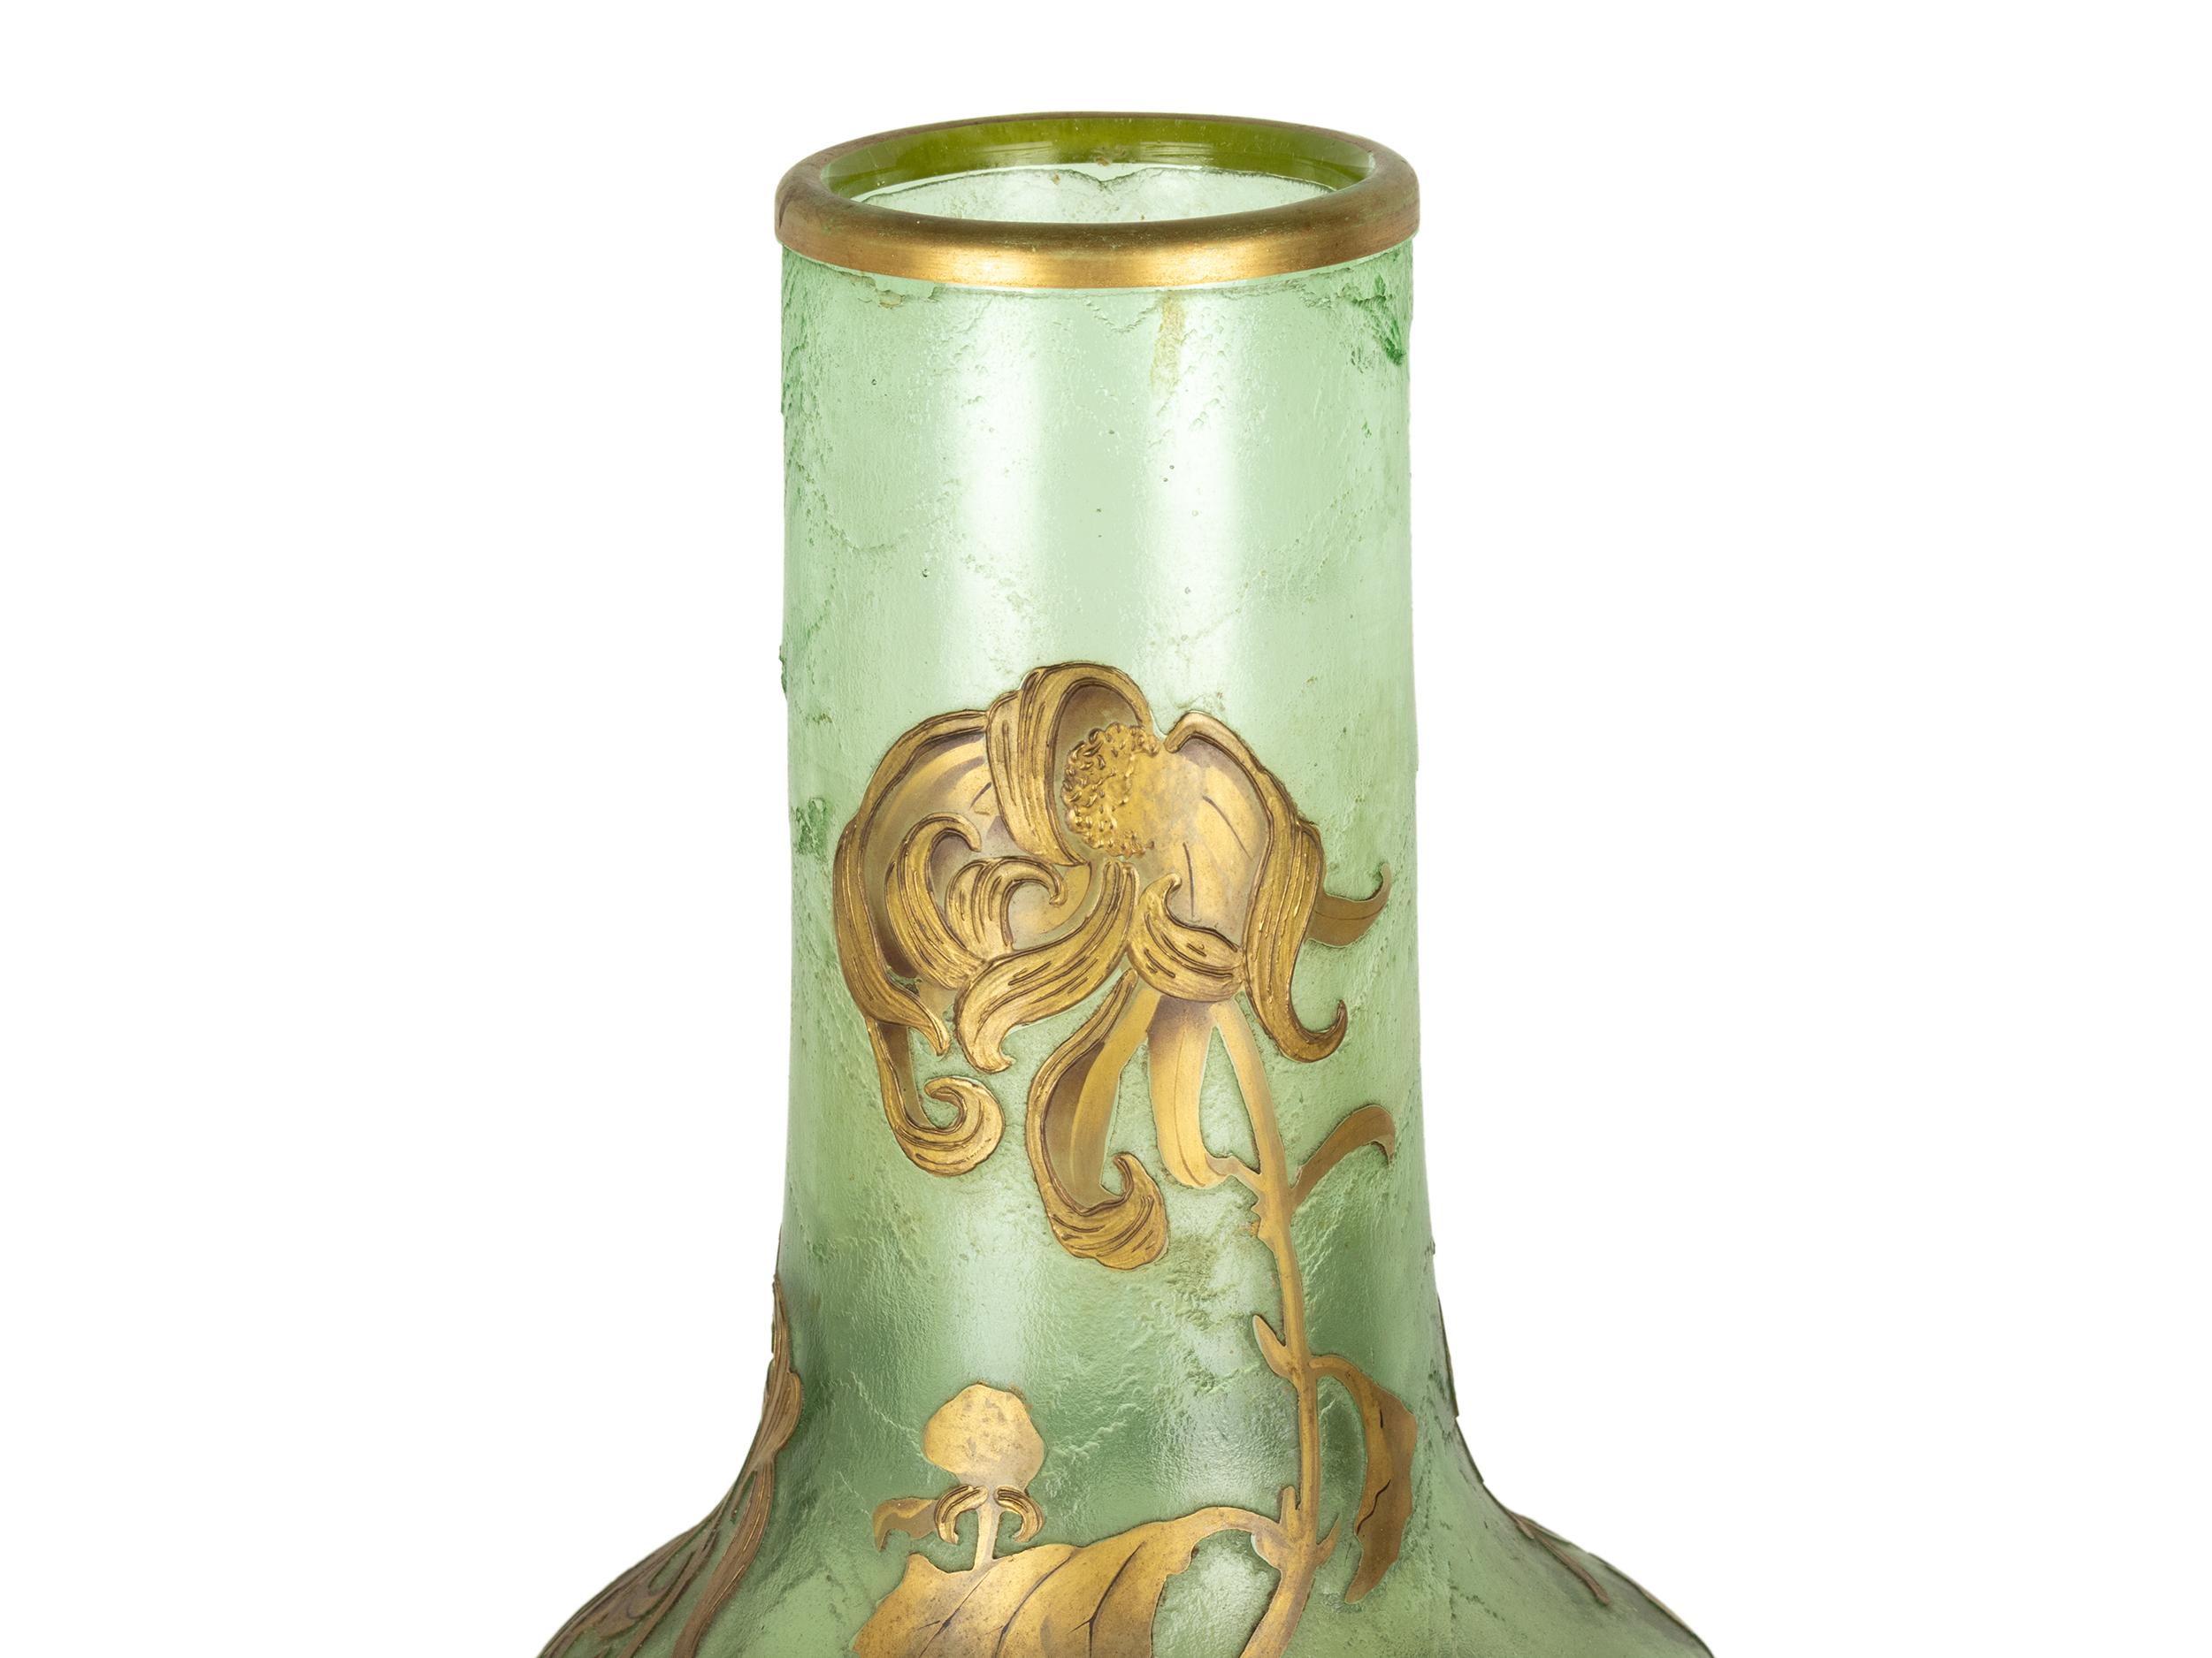 Montjoye, France, Large Art Nouveau Vase in Mouth-Blown Art Glass, 1880-1900 In Good Condition For Sale In Lisbon, PT